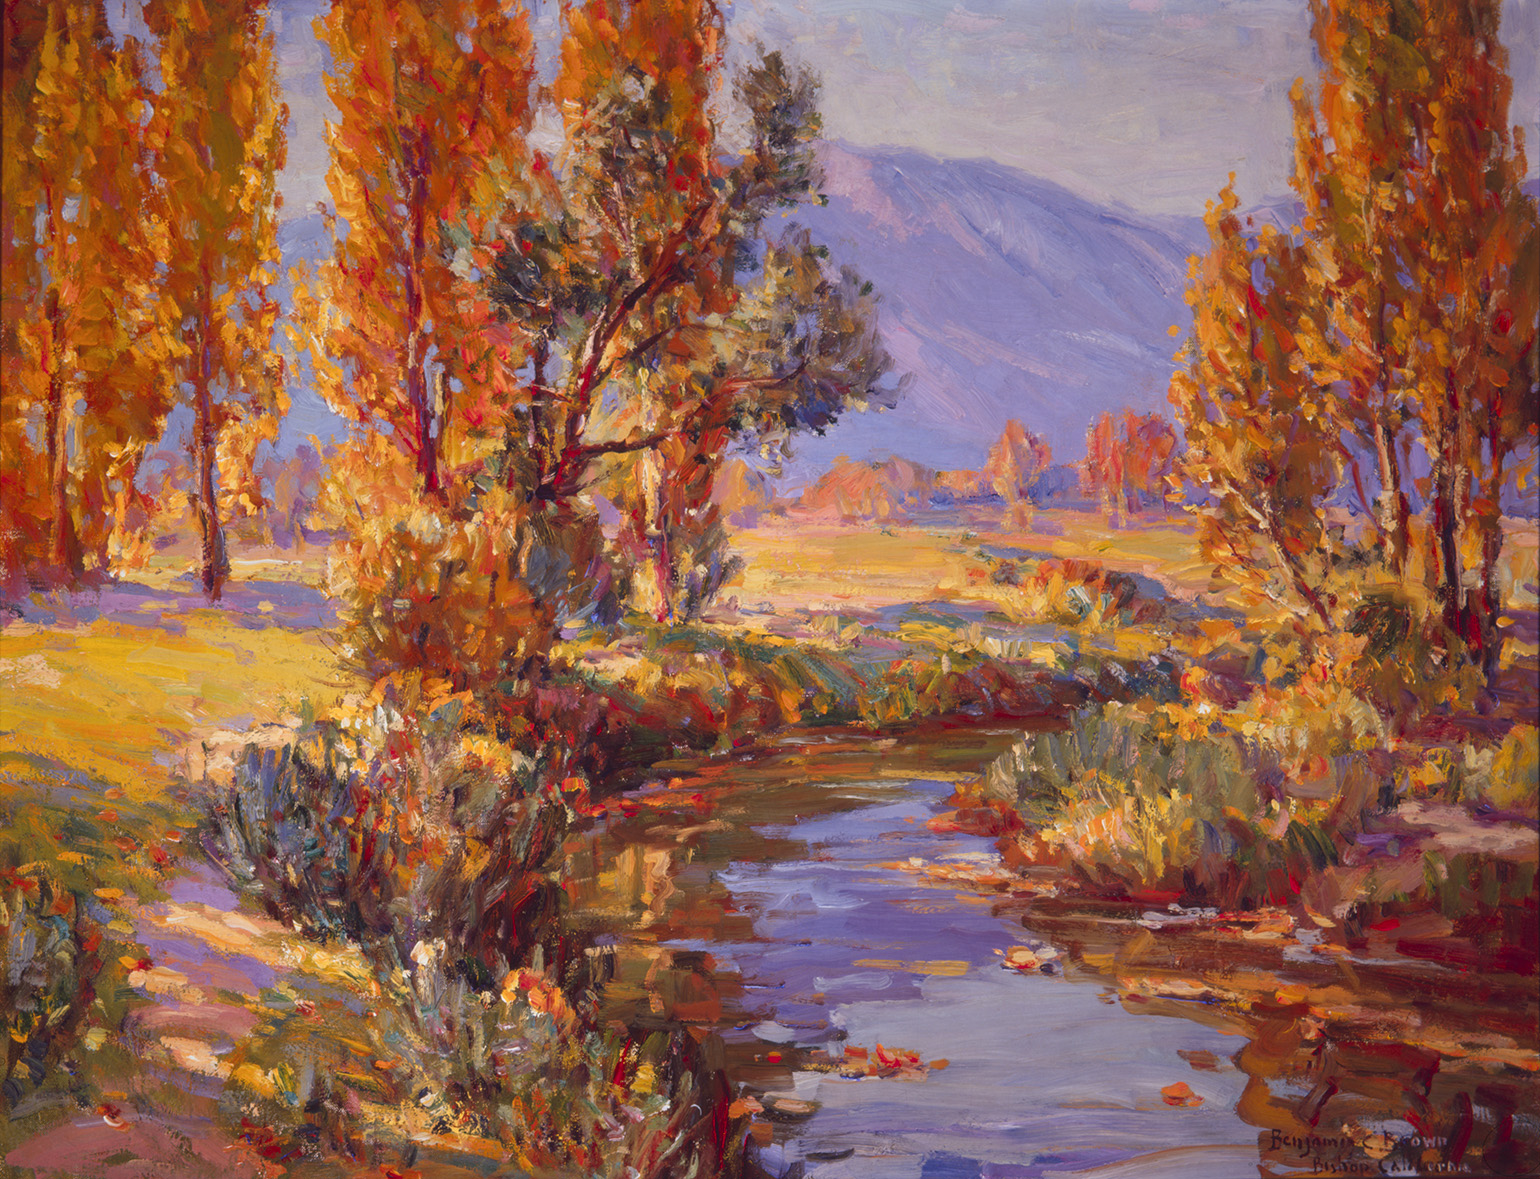 Benjamin Brown, Autumn Glory, circa 1920, Oil on canvas, 28 x 36 in. UC Irvine Institute and Museum of California Art, Gift of The Irvine Museum